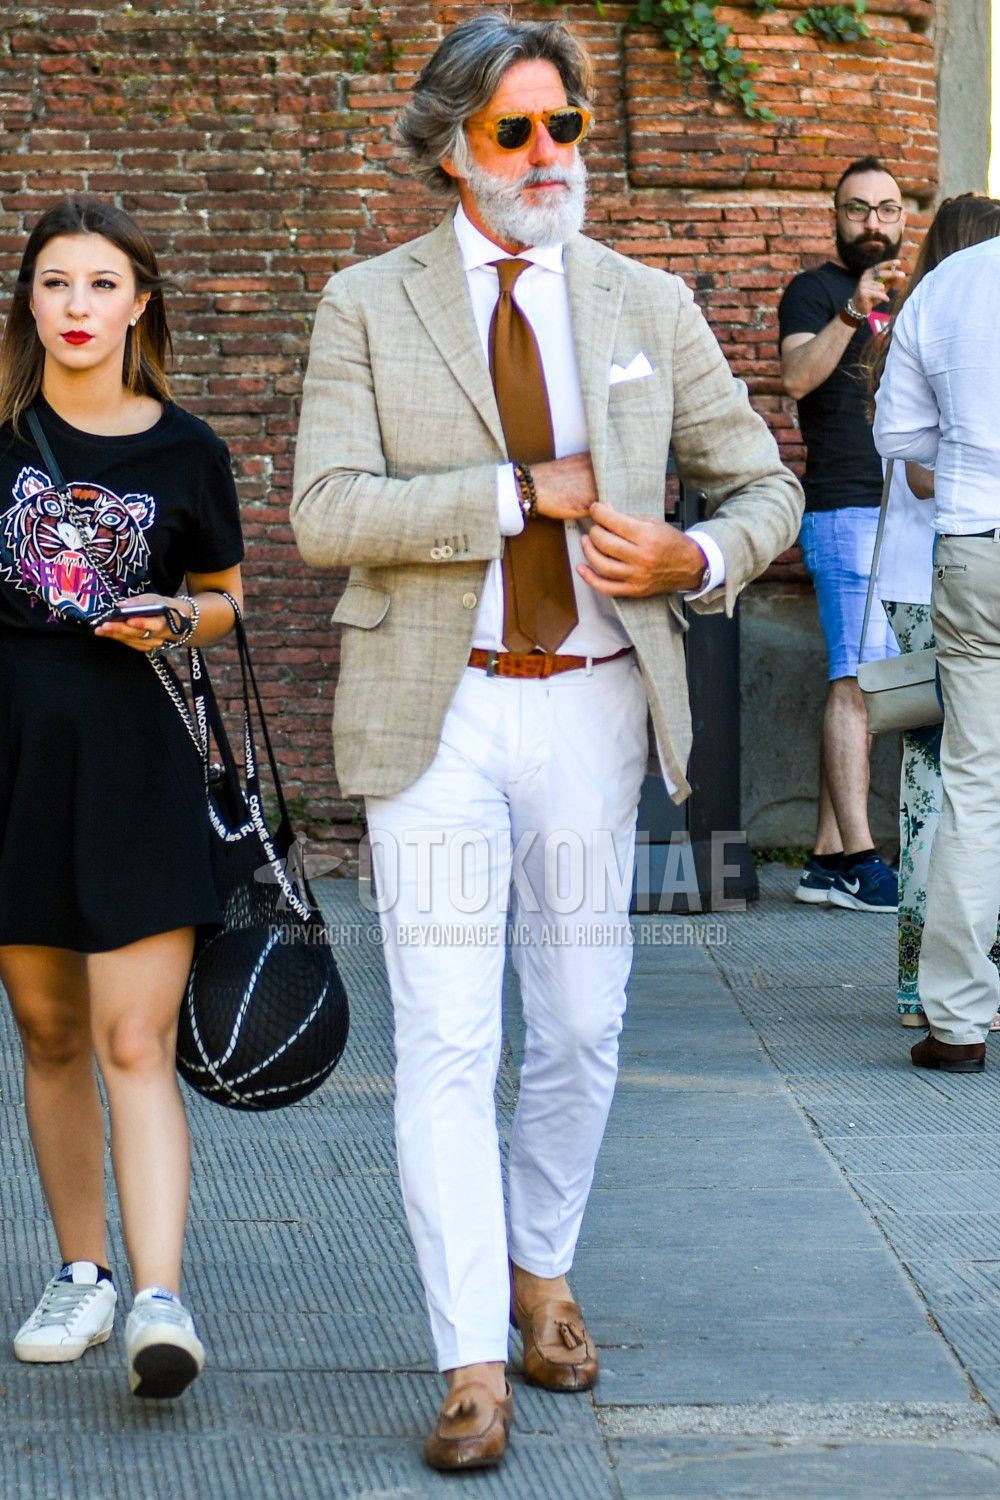 Why You Should Wear White Pants After Labor Day (Other Than Just To Piss  Off Old Money) | Mens casual outfits summer, Pants outfit men, Mens fashion  casual outfits